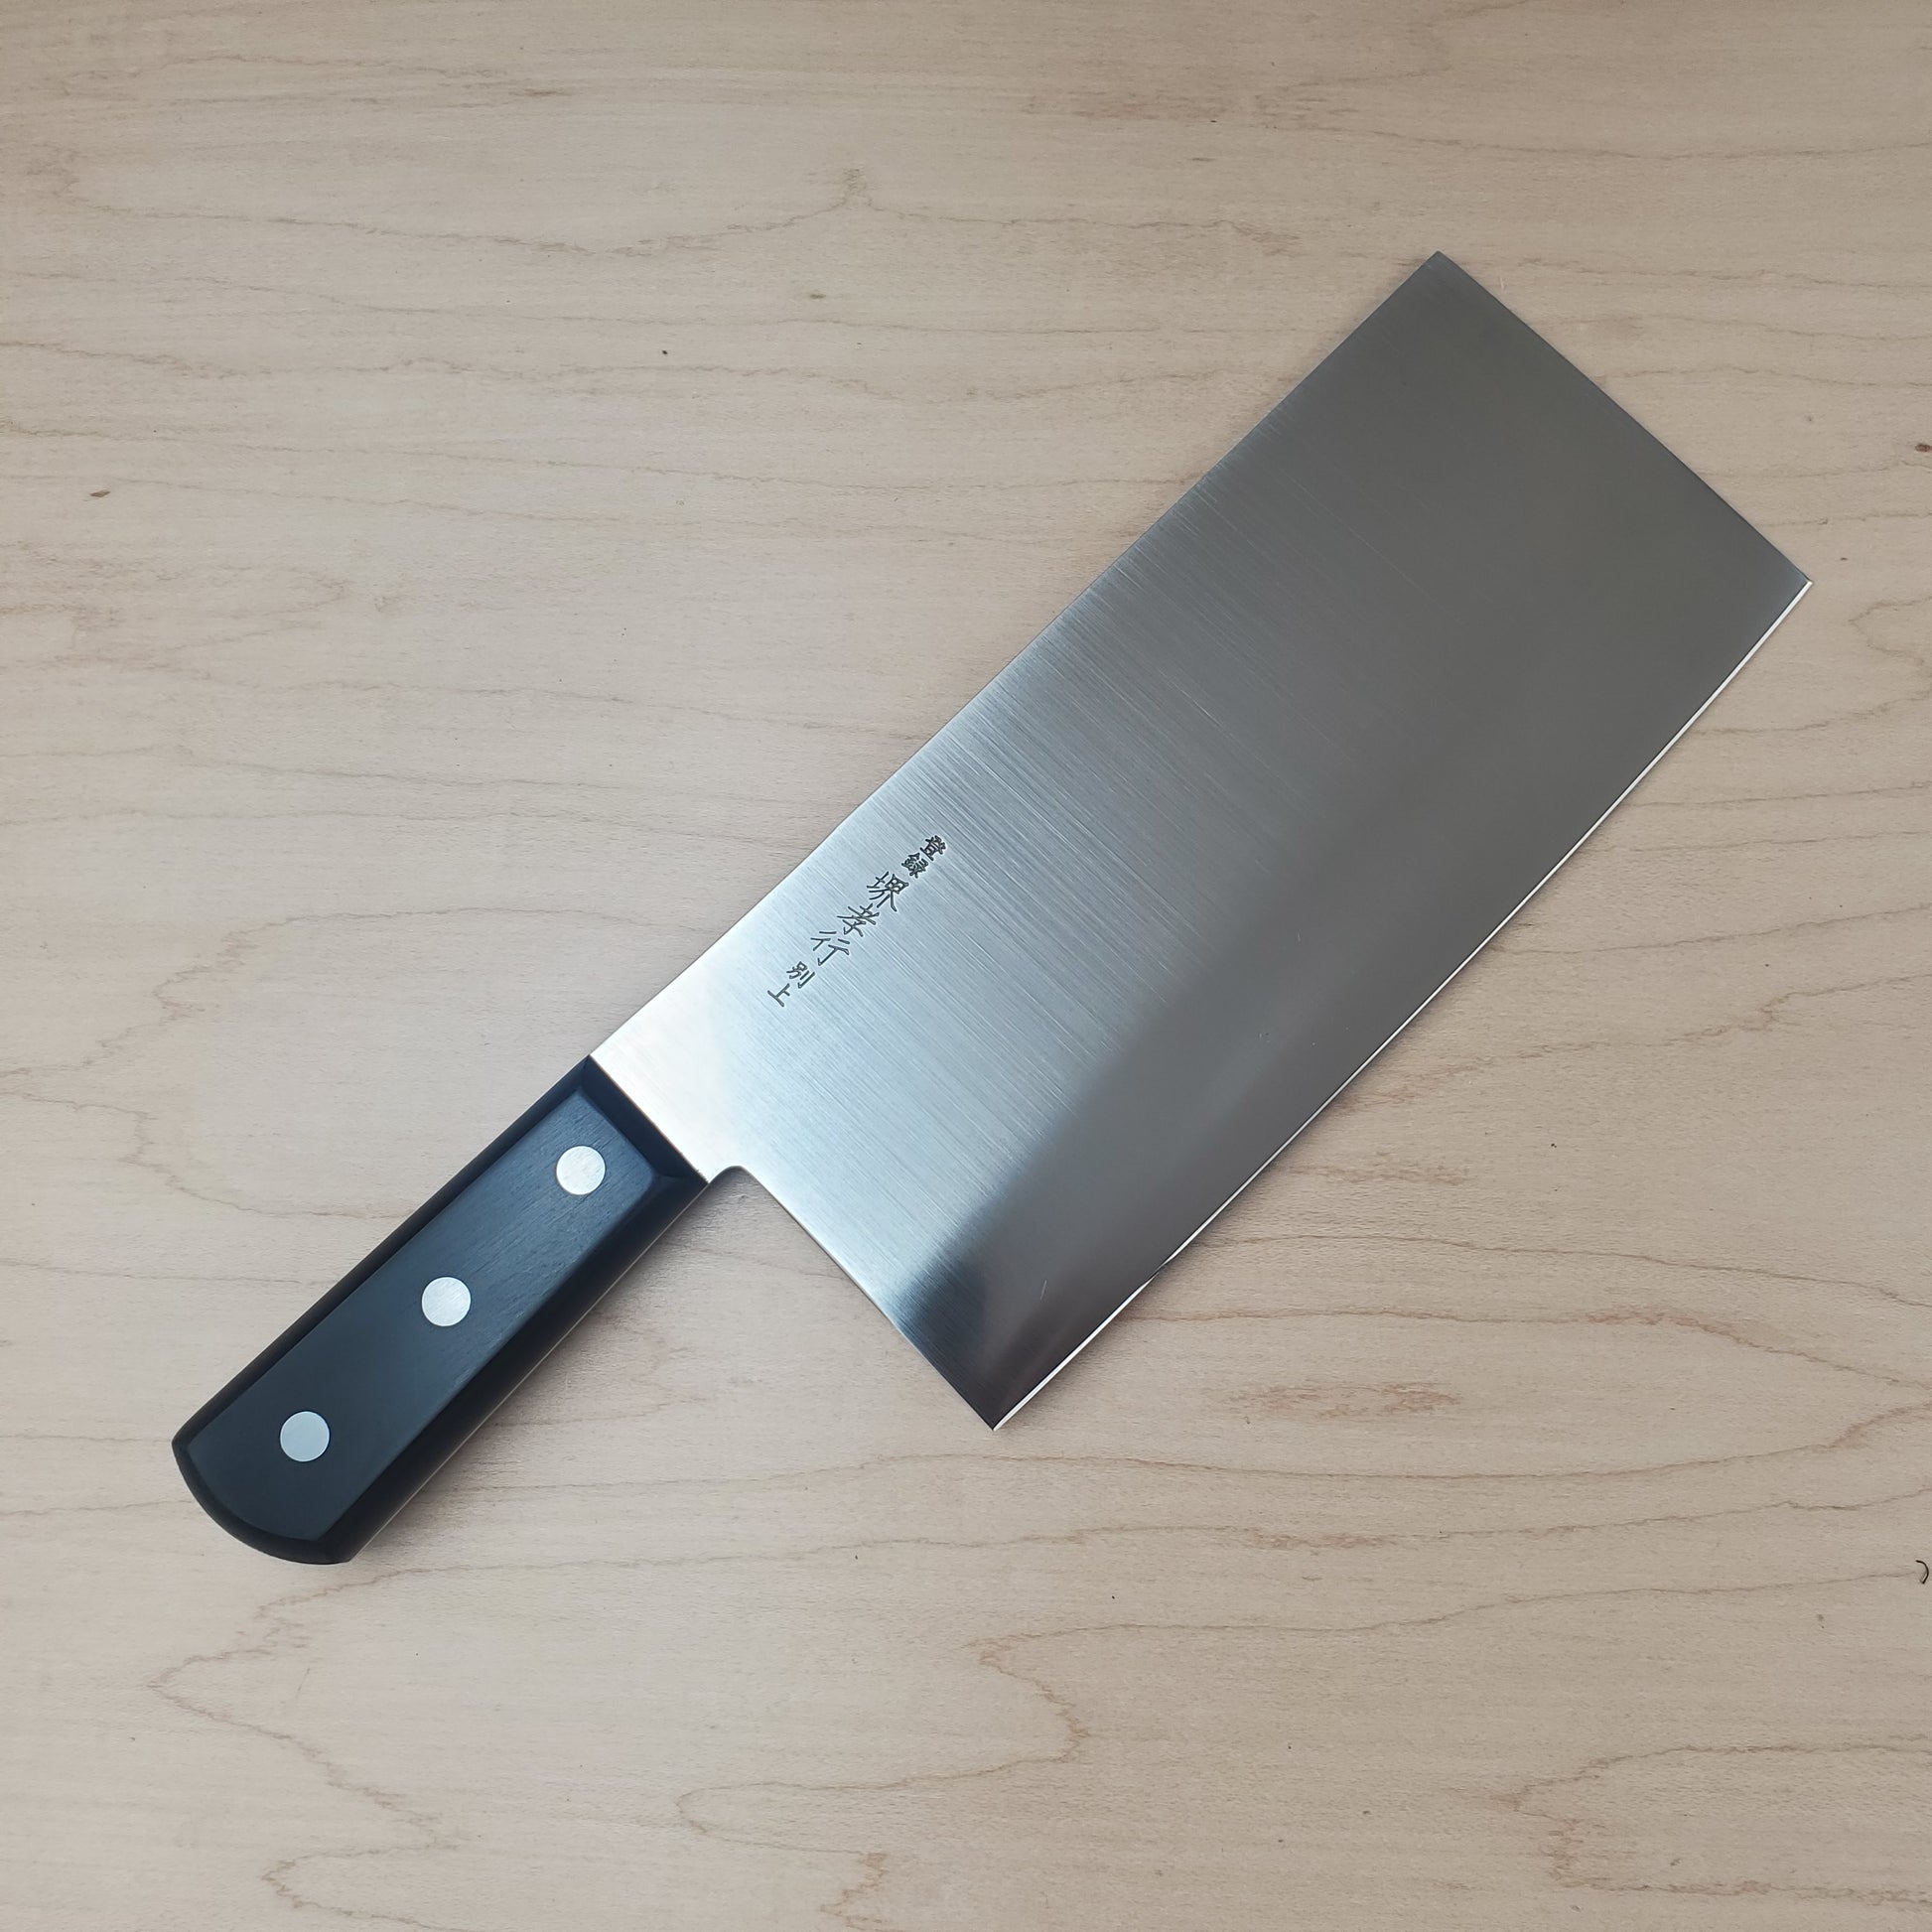 Chinese cleaver knife